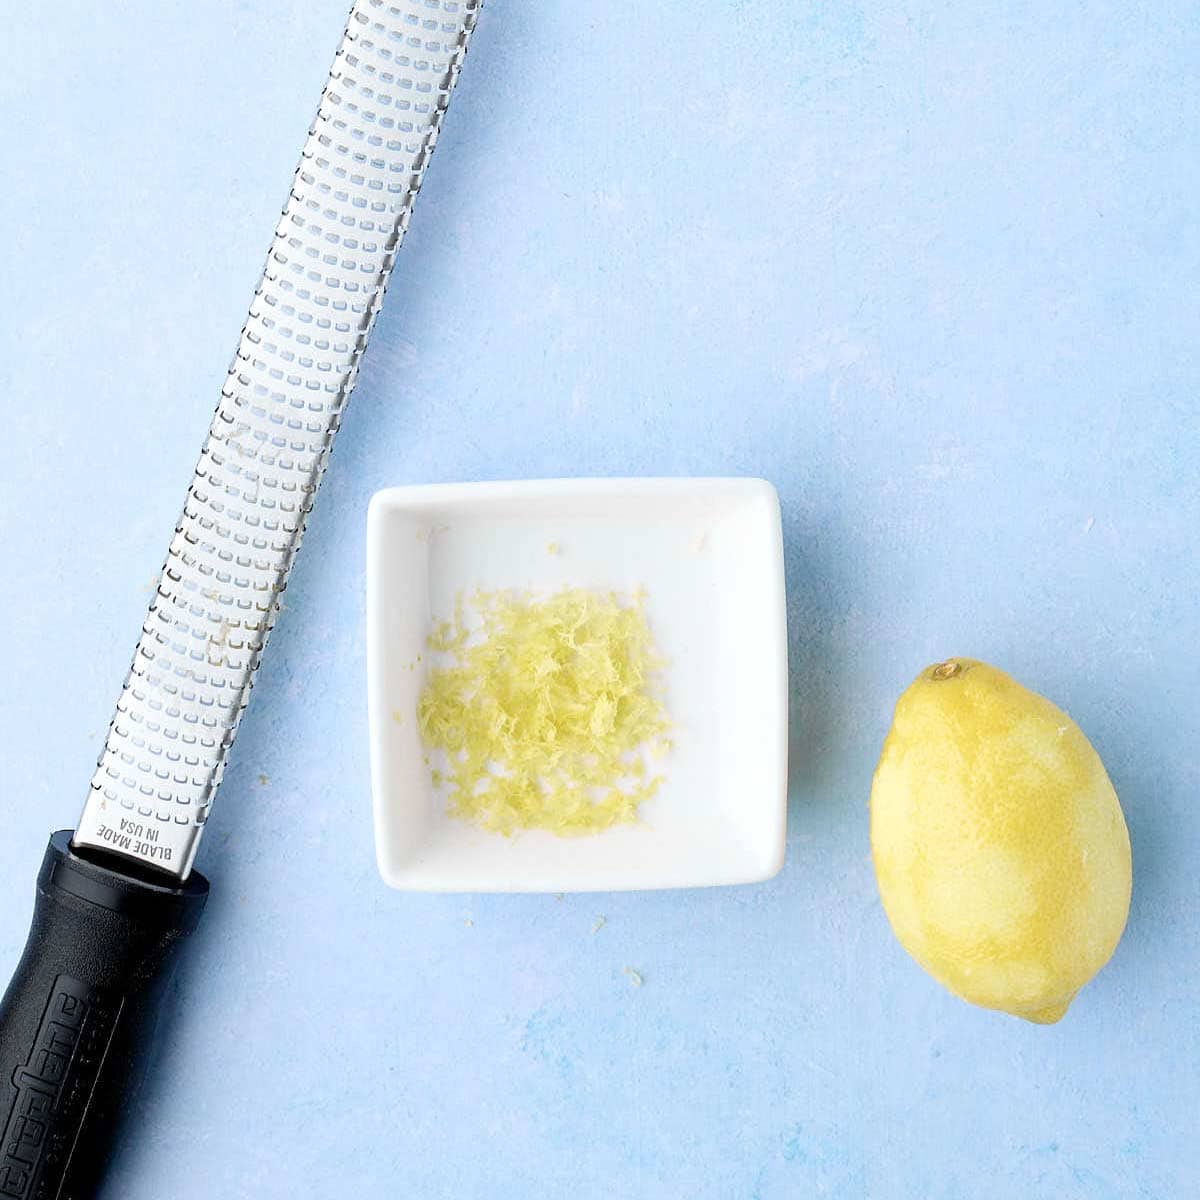 Zester, lemon zest in a bowl, and a lemon that has been zested lined up on the counter.